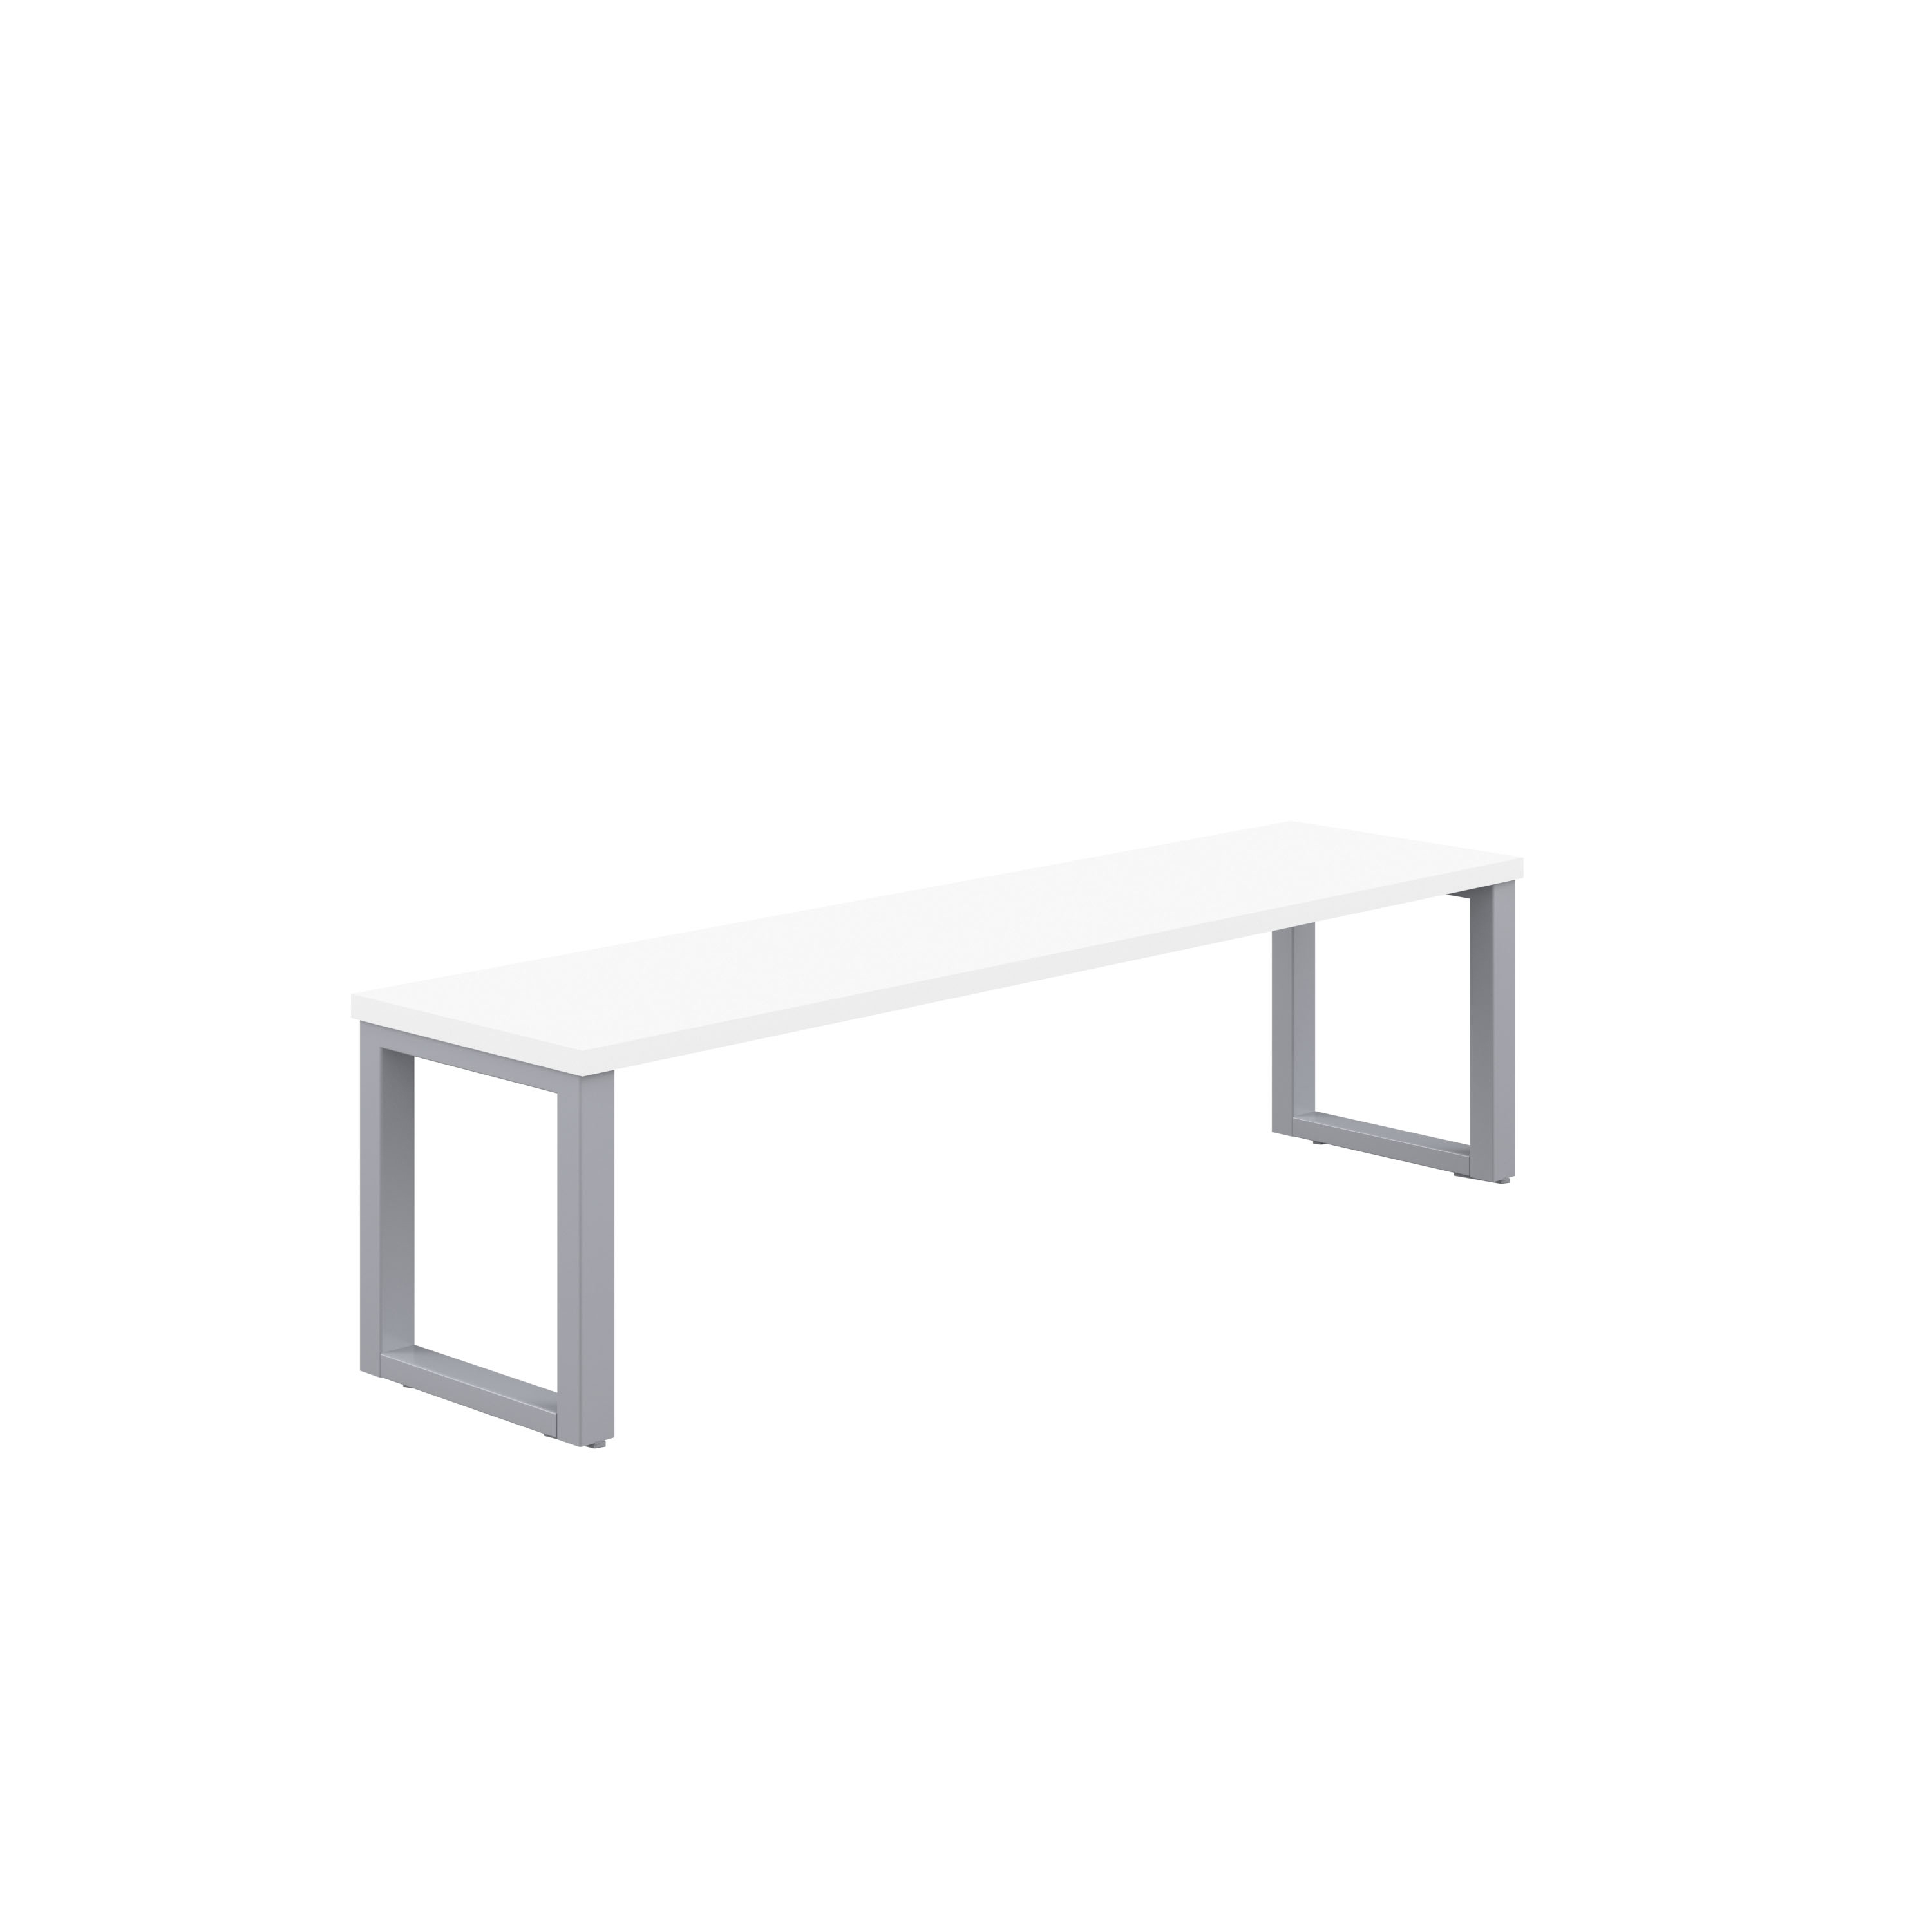 Meeting Room Bench Seat - White - 1600mm